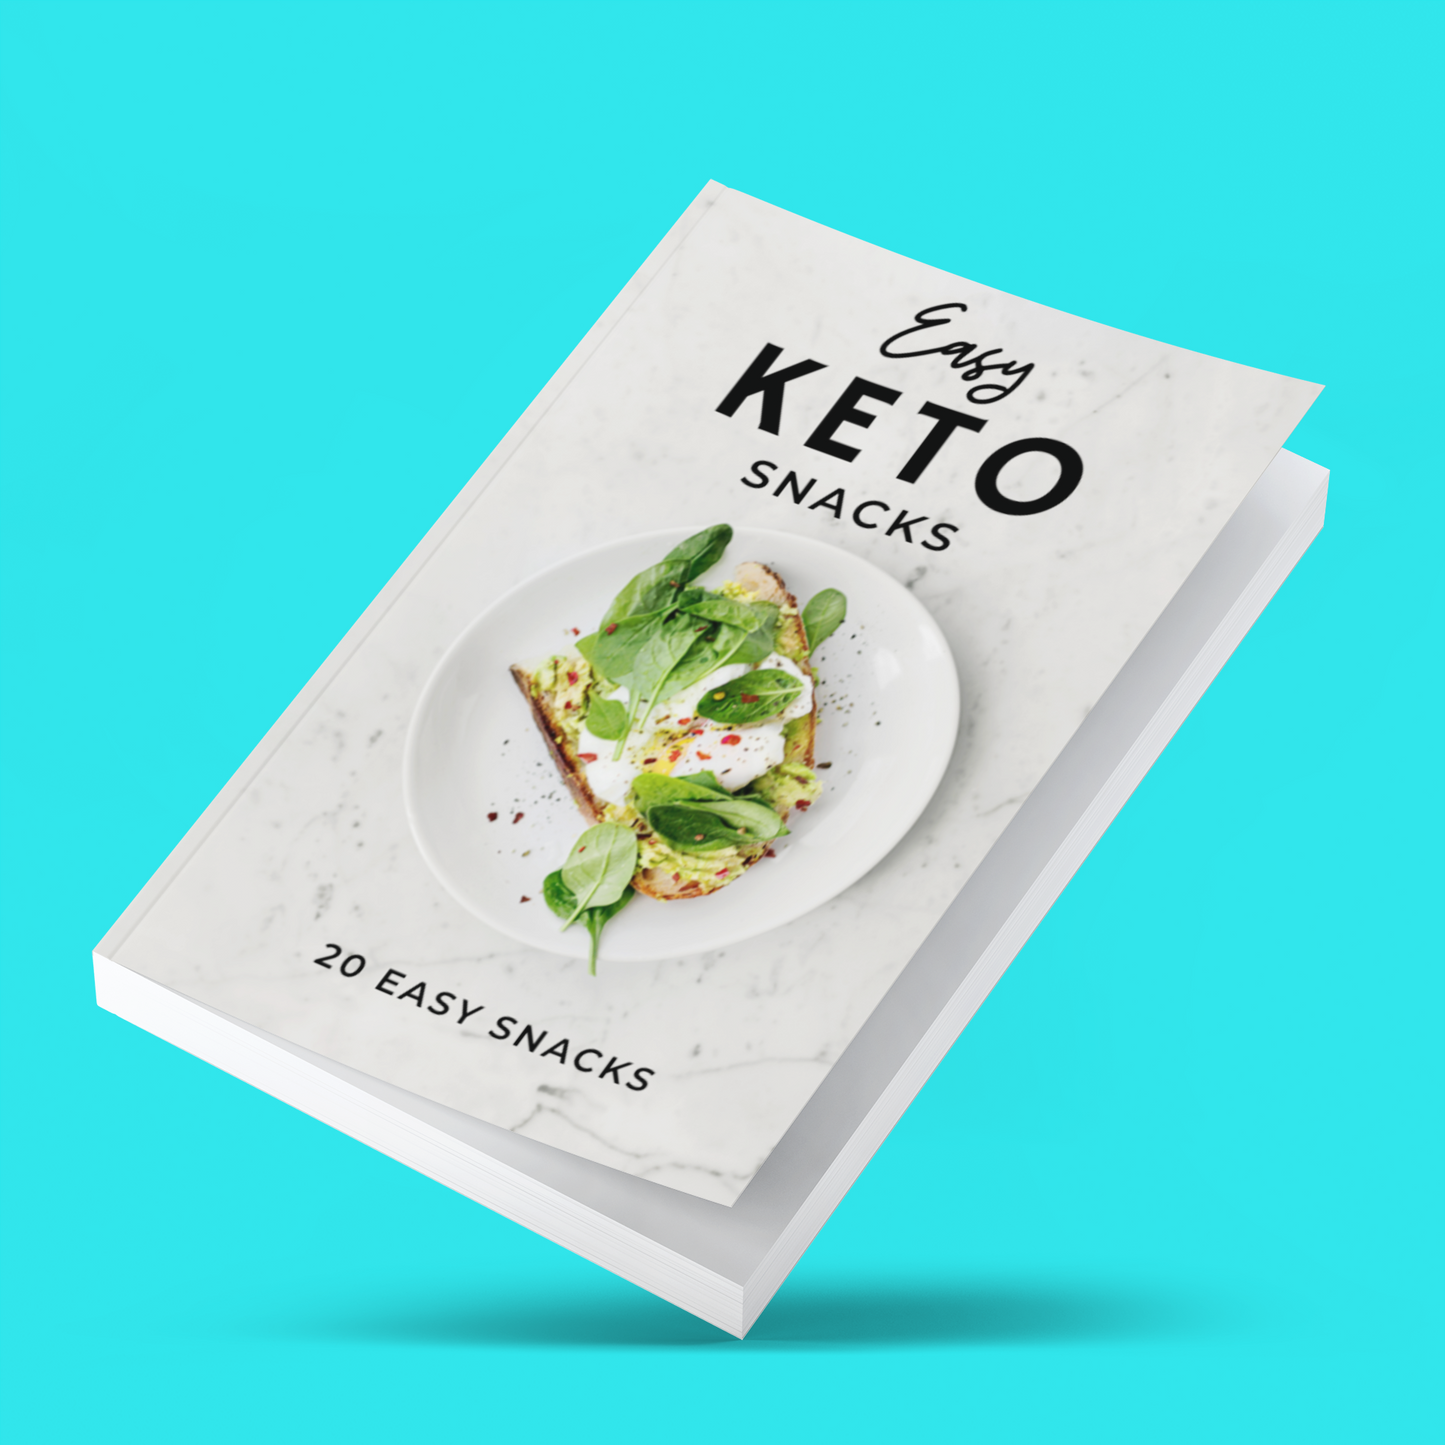 Easy Keto Snacks: 20 Delicious and Quick Recipes for a Healthier You